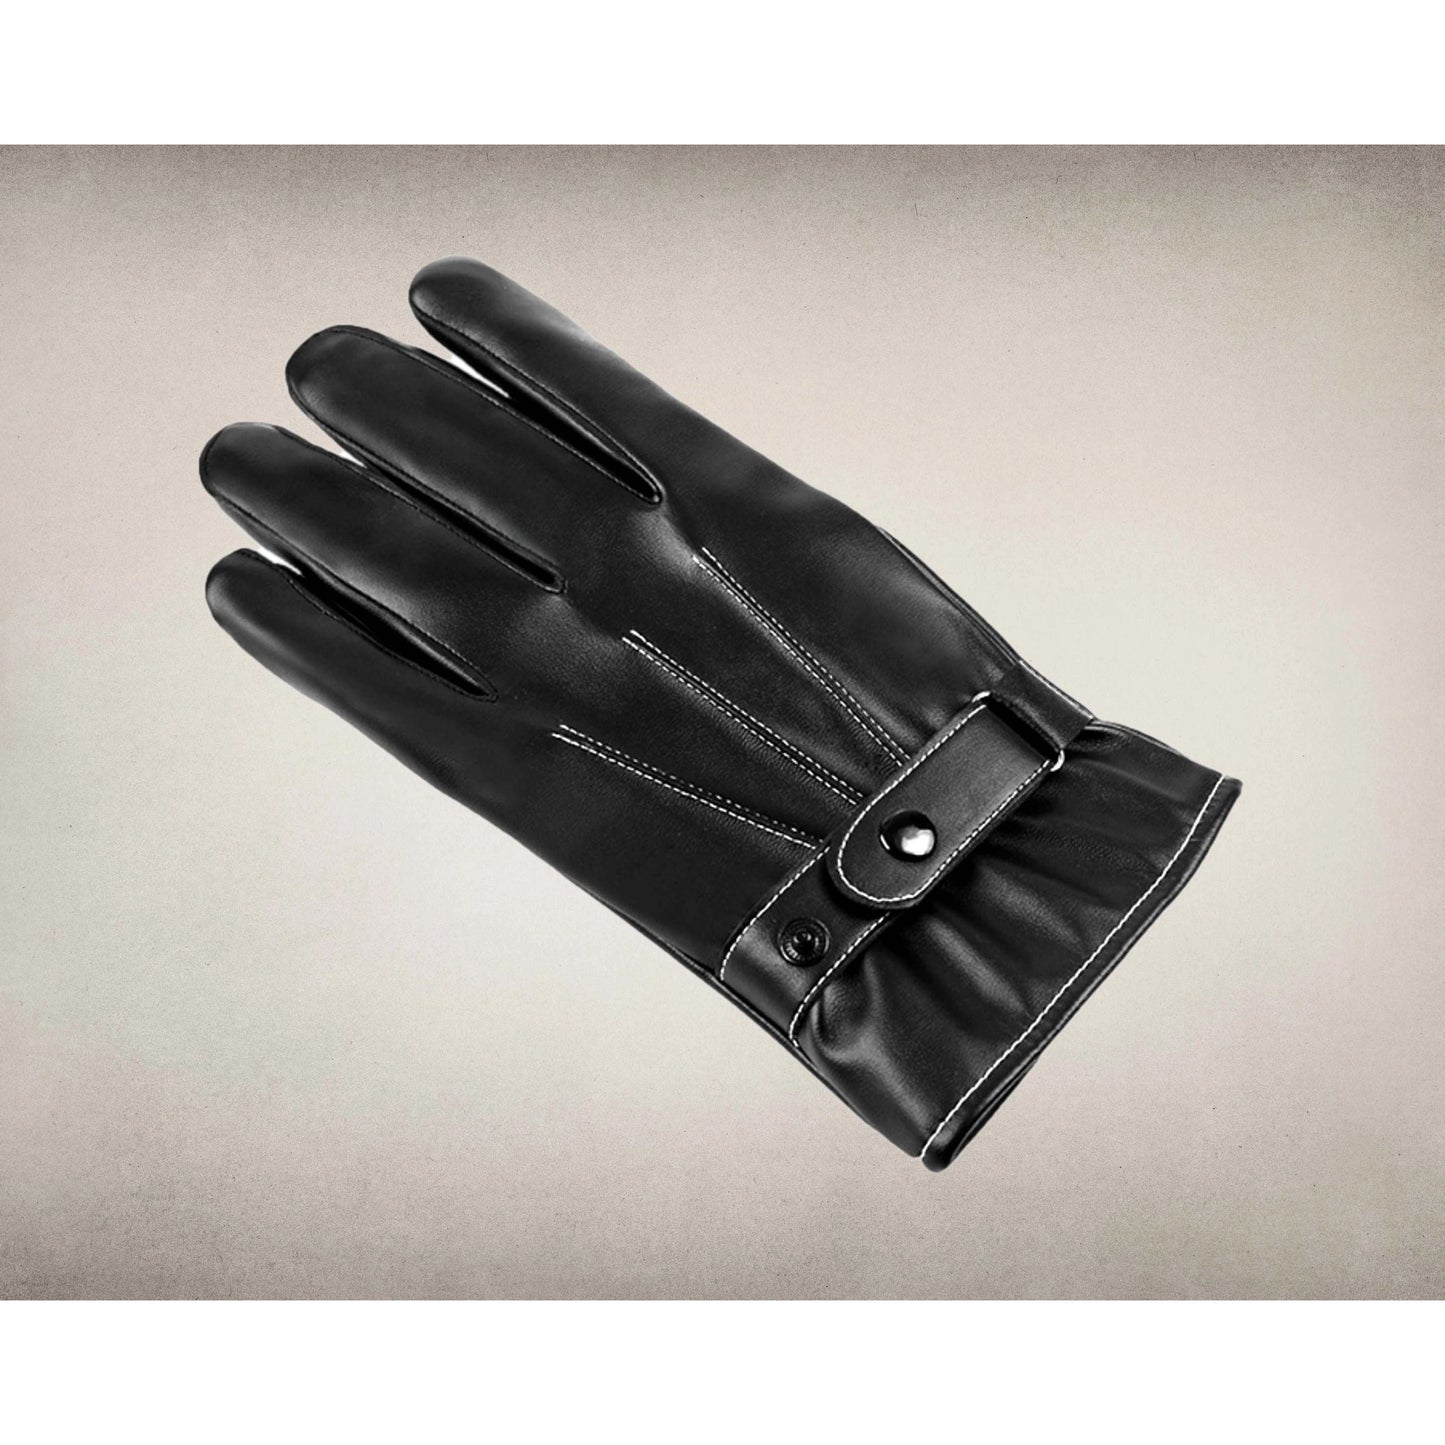 Black Unisex Lined Winter Gloves with White Stitching & Adjusting Strap